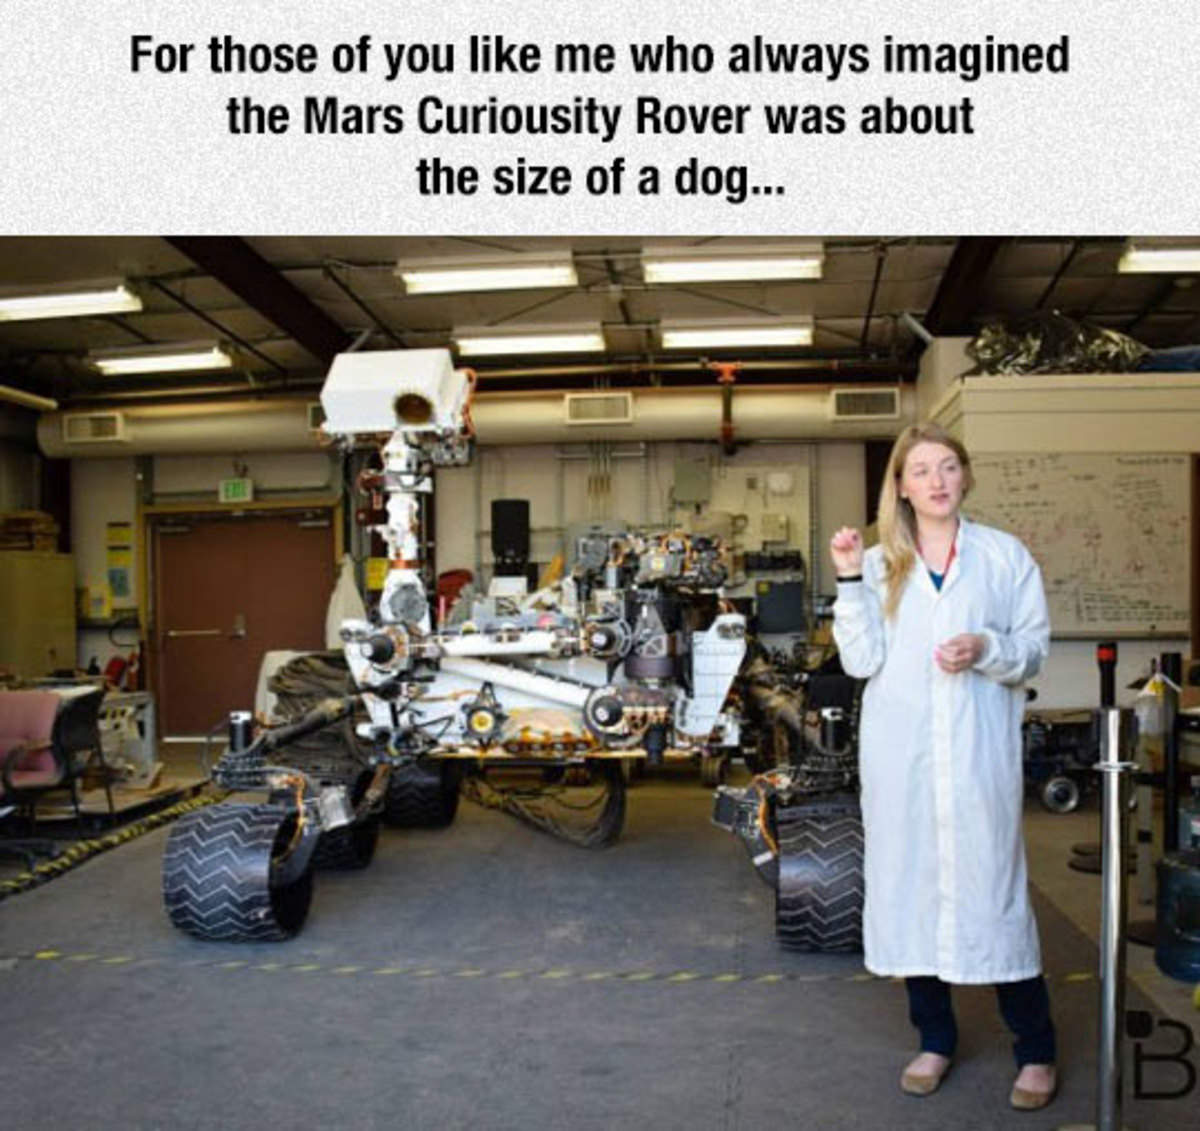 mars curiosity rover size - For those of you me who always imagined the Mars Curiousity Rover was about the size of a dog...